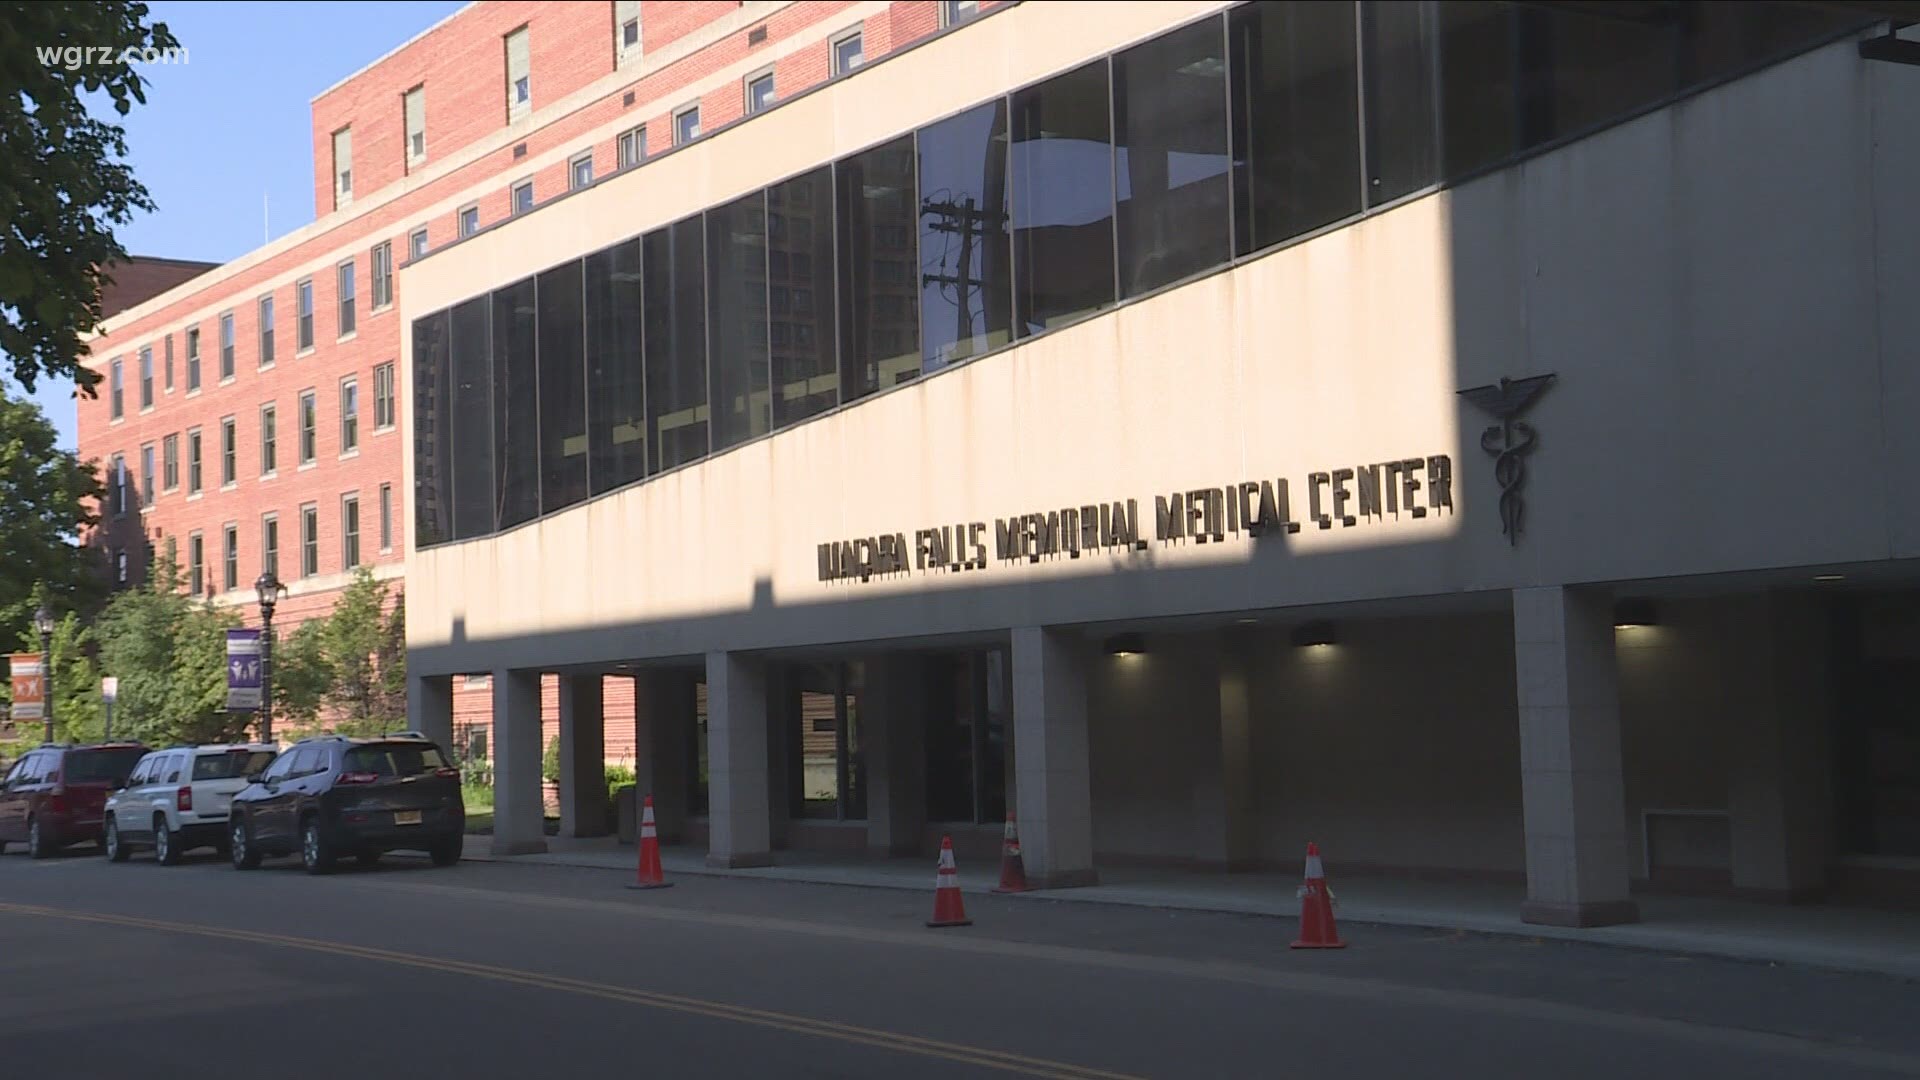 Local hospitals respond to COVID-19 surge in WNY